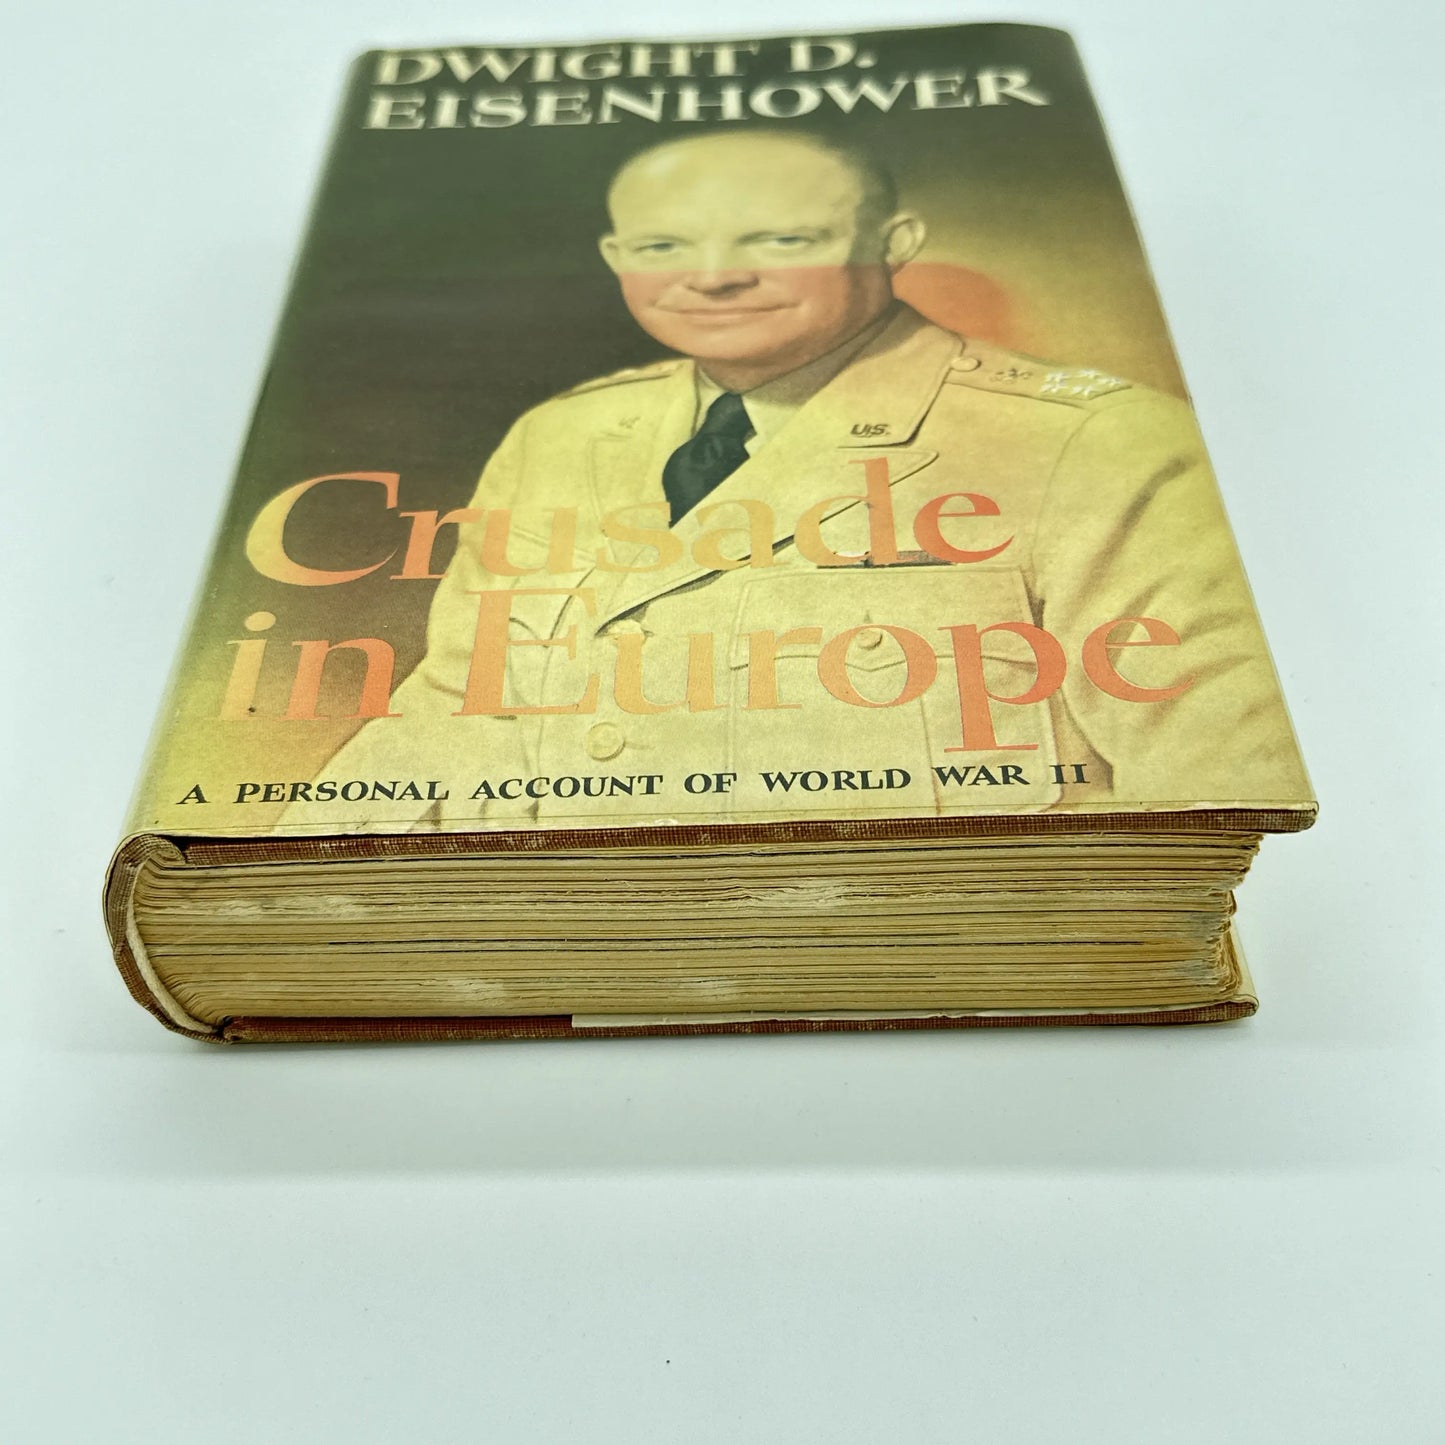 "Crusade in Europe" by Dwight D. Eisenhower — Signed copy